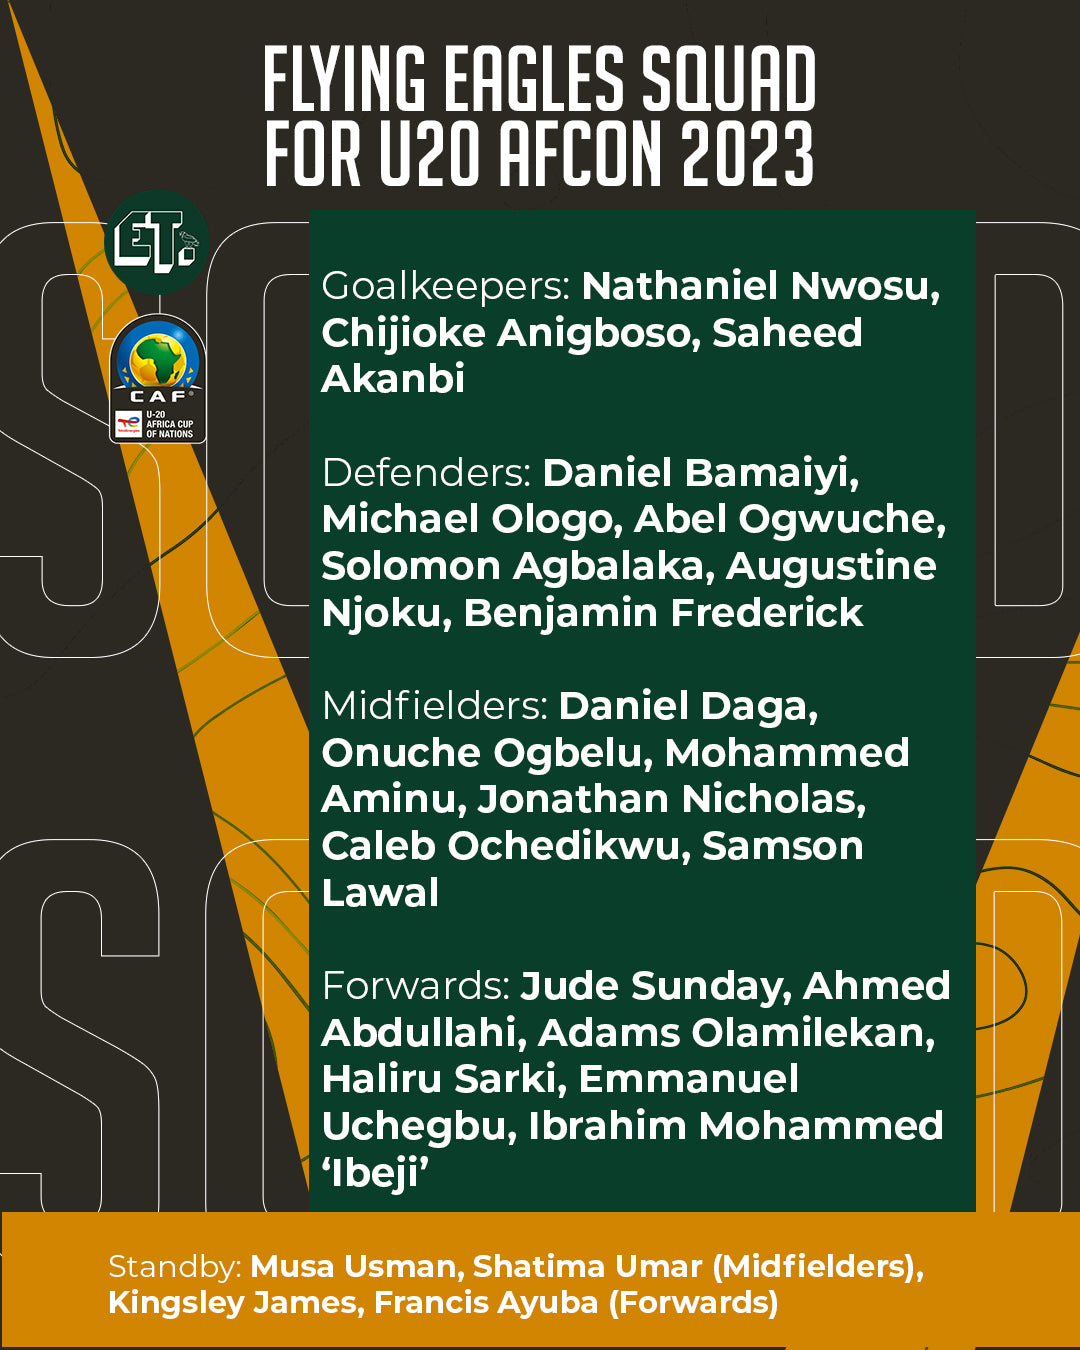 Official: The 21-man Flying Eagles squad for the 2023 U20 Africa Cup of Nations